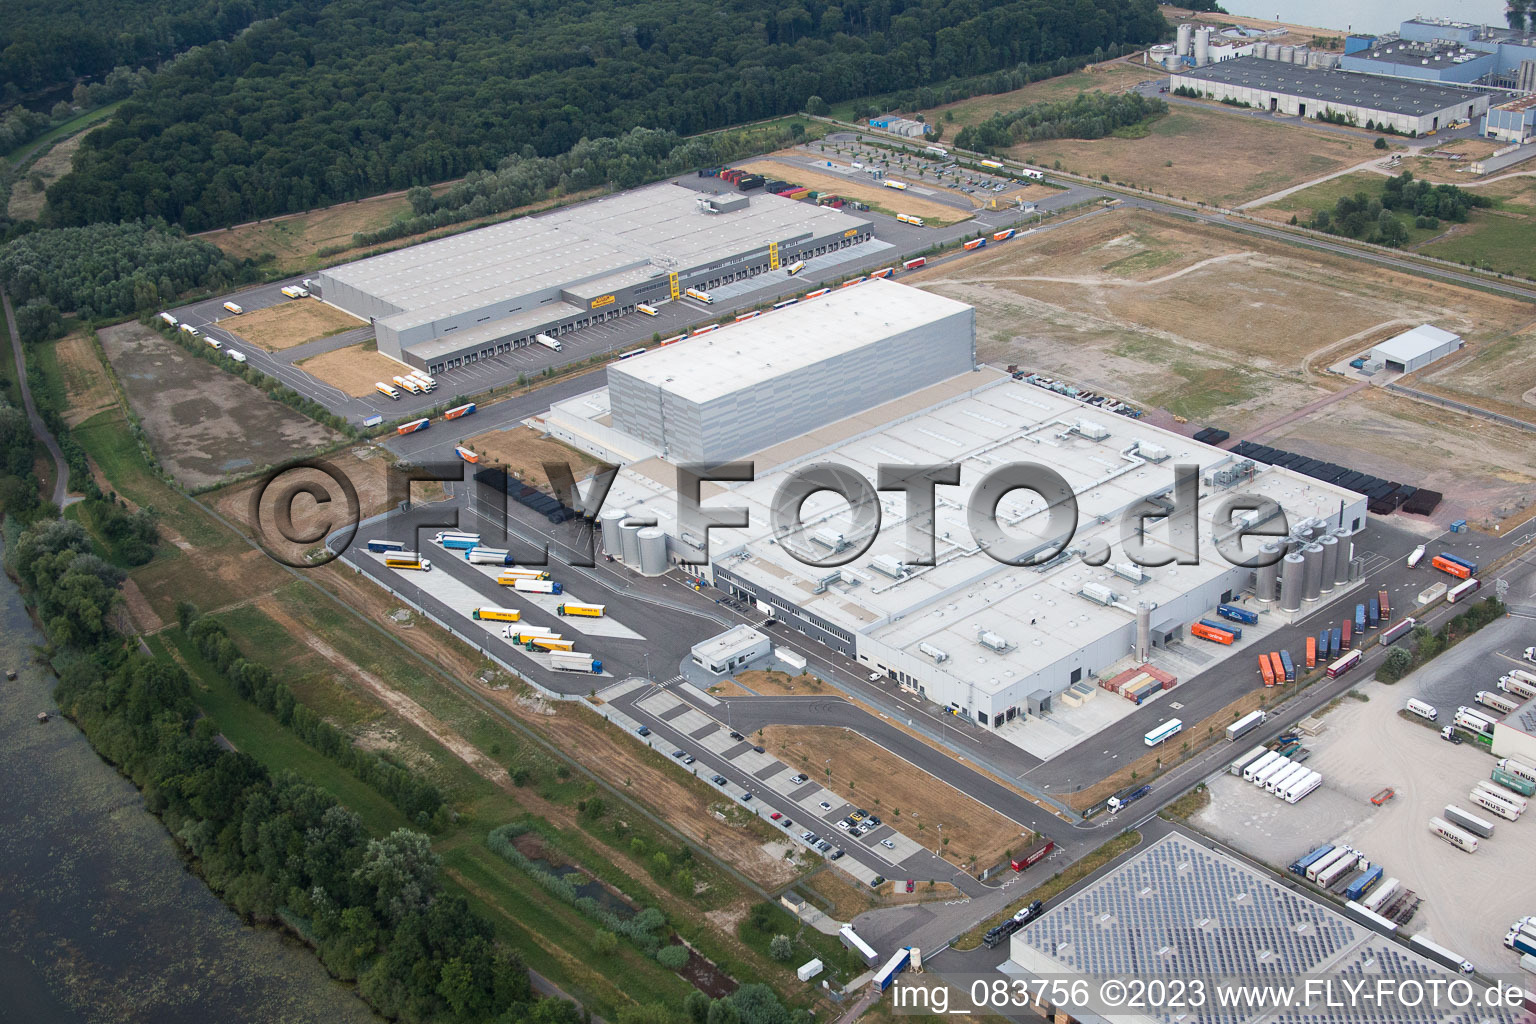 Drone recording of Oberwald industrial area in Wörth am Rhein in the state Rhineland-Palatinate, Germany